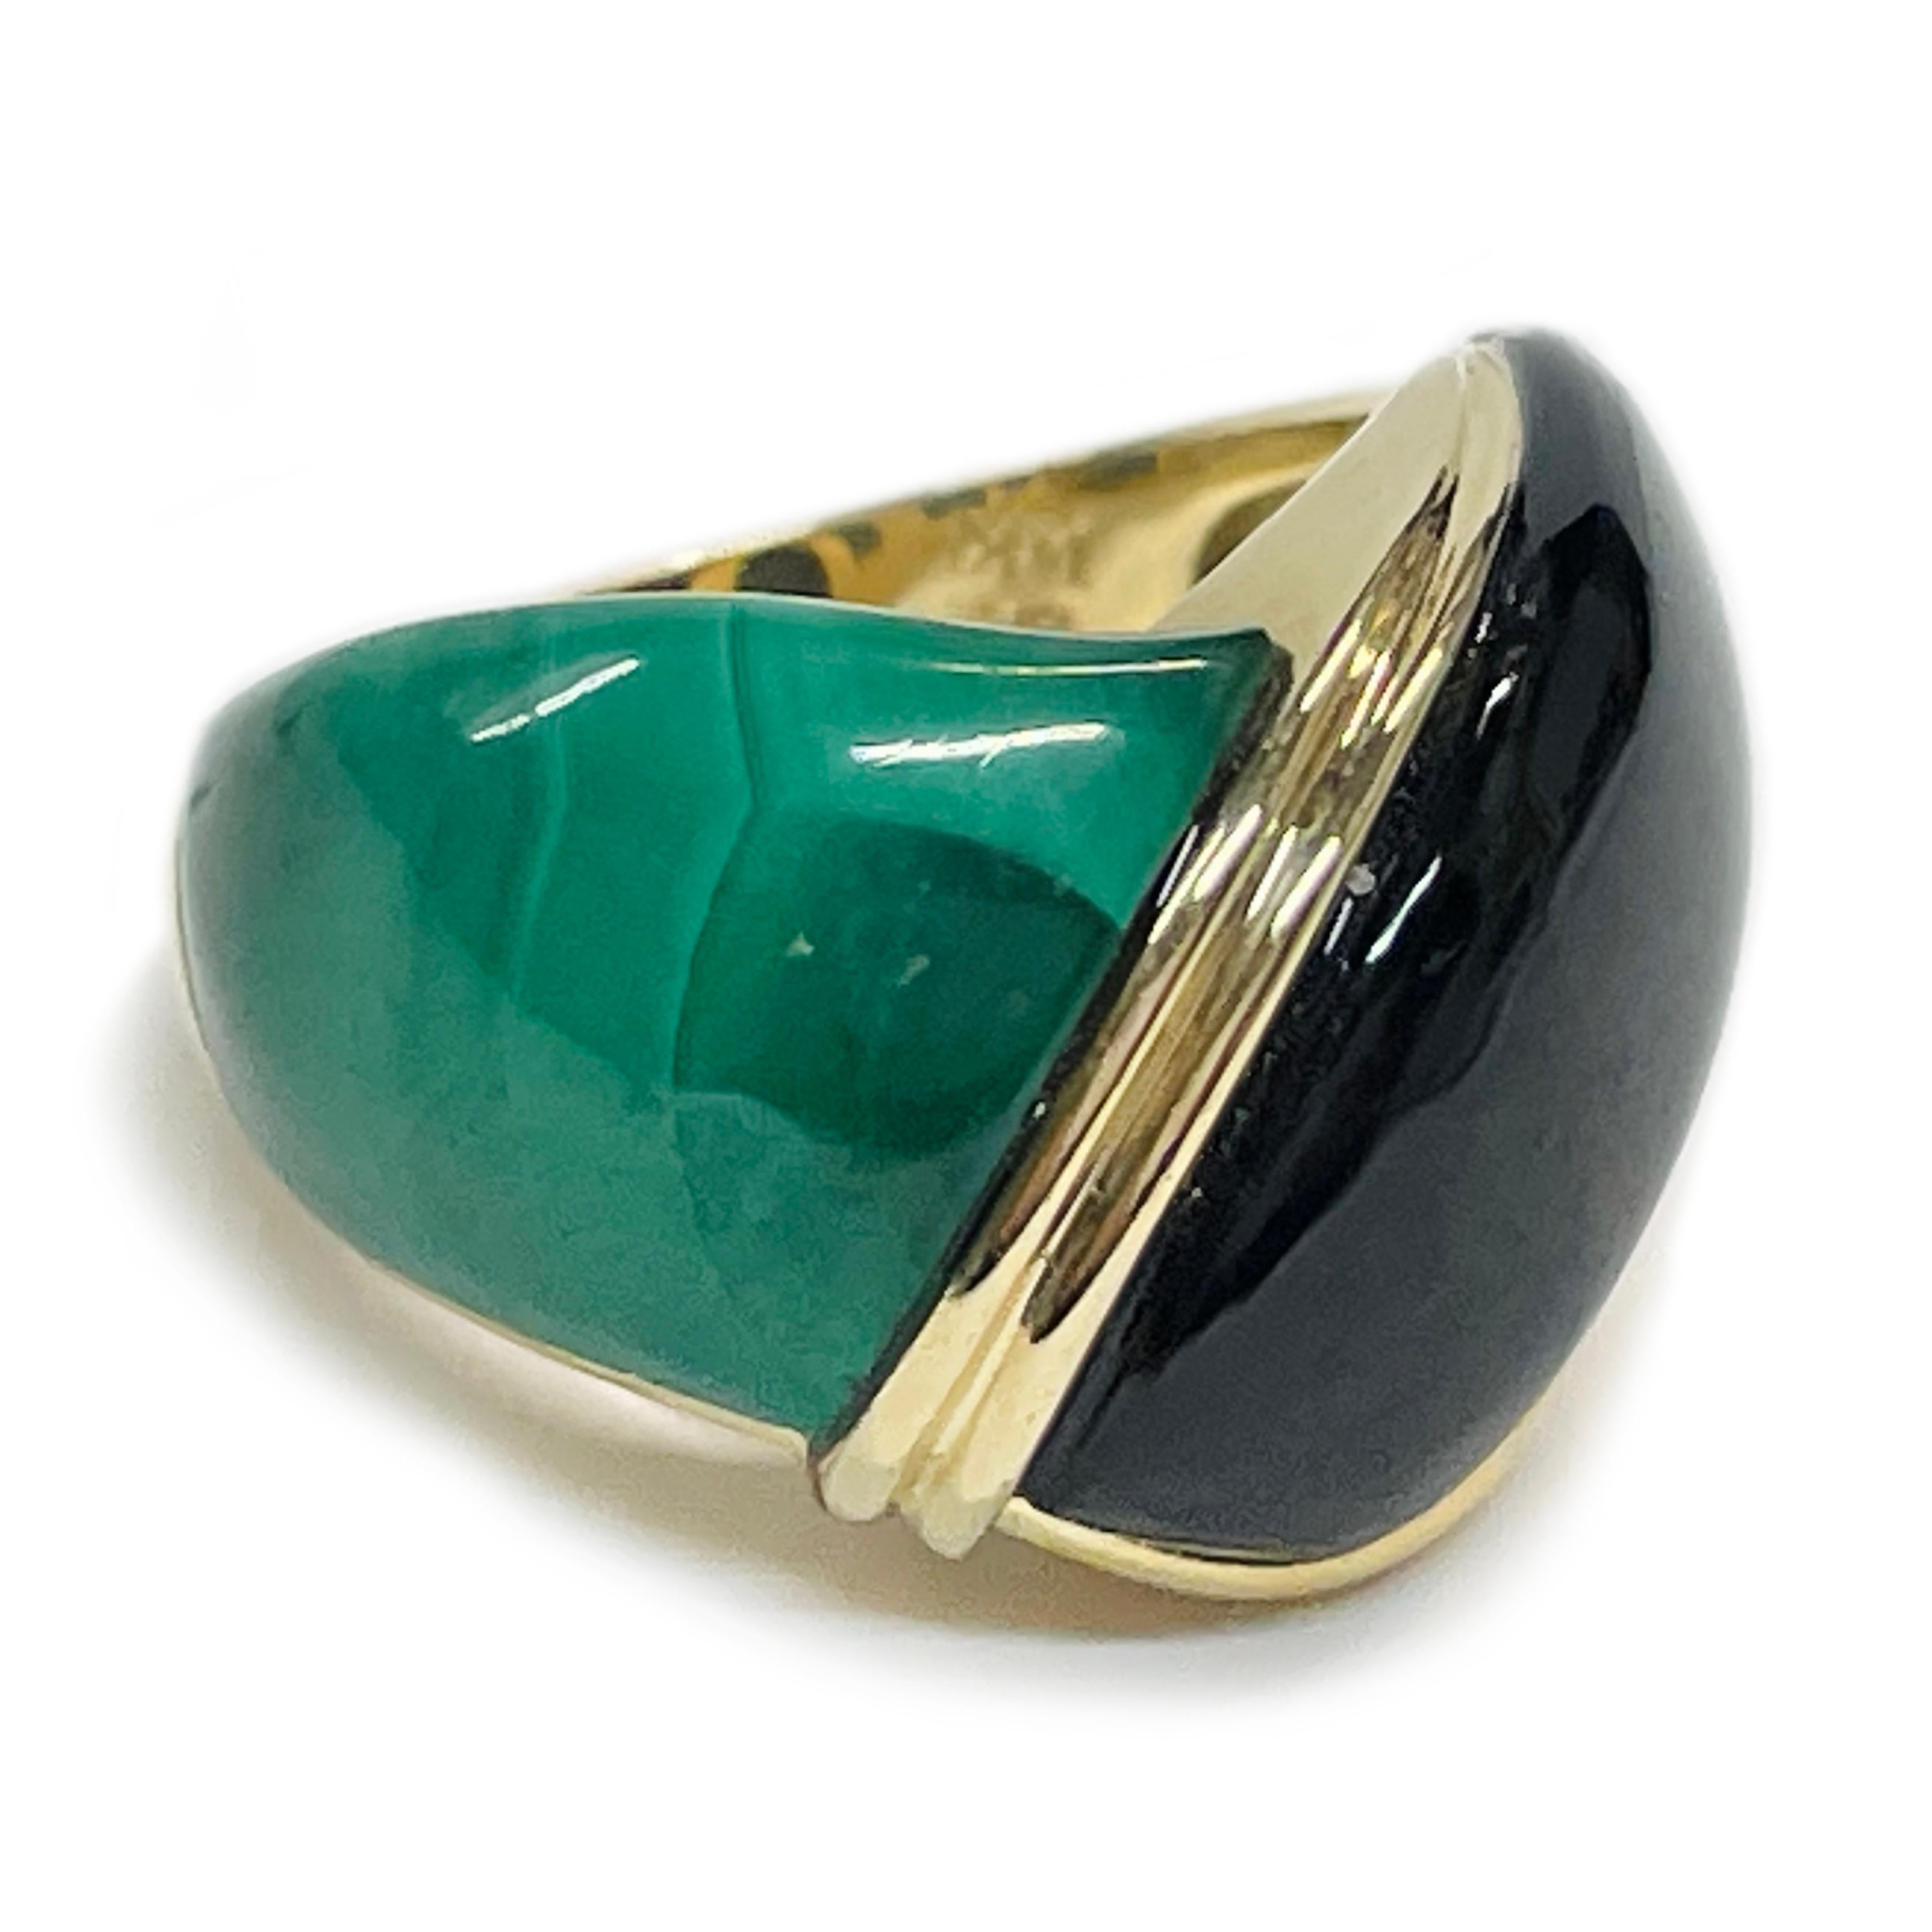 14 Karat Black Onyx Malachite Cabochon Ring. The ring features an inlay black onyx and malachite special-cut cabochons set in between a gold frame. The ring has a smooth shiny finish and a tapered band. The ring size is 6 1/2. Stamped on the inside